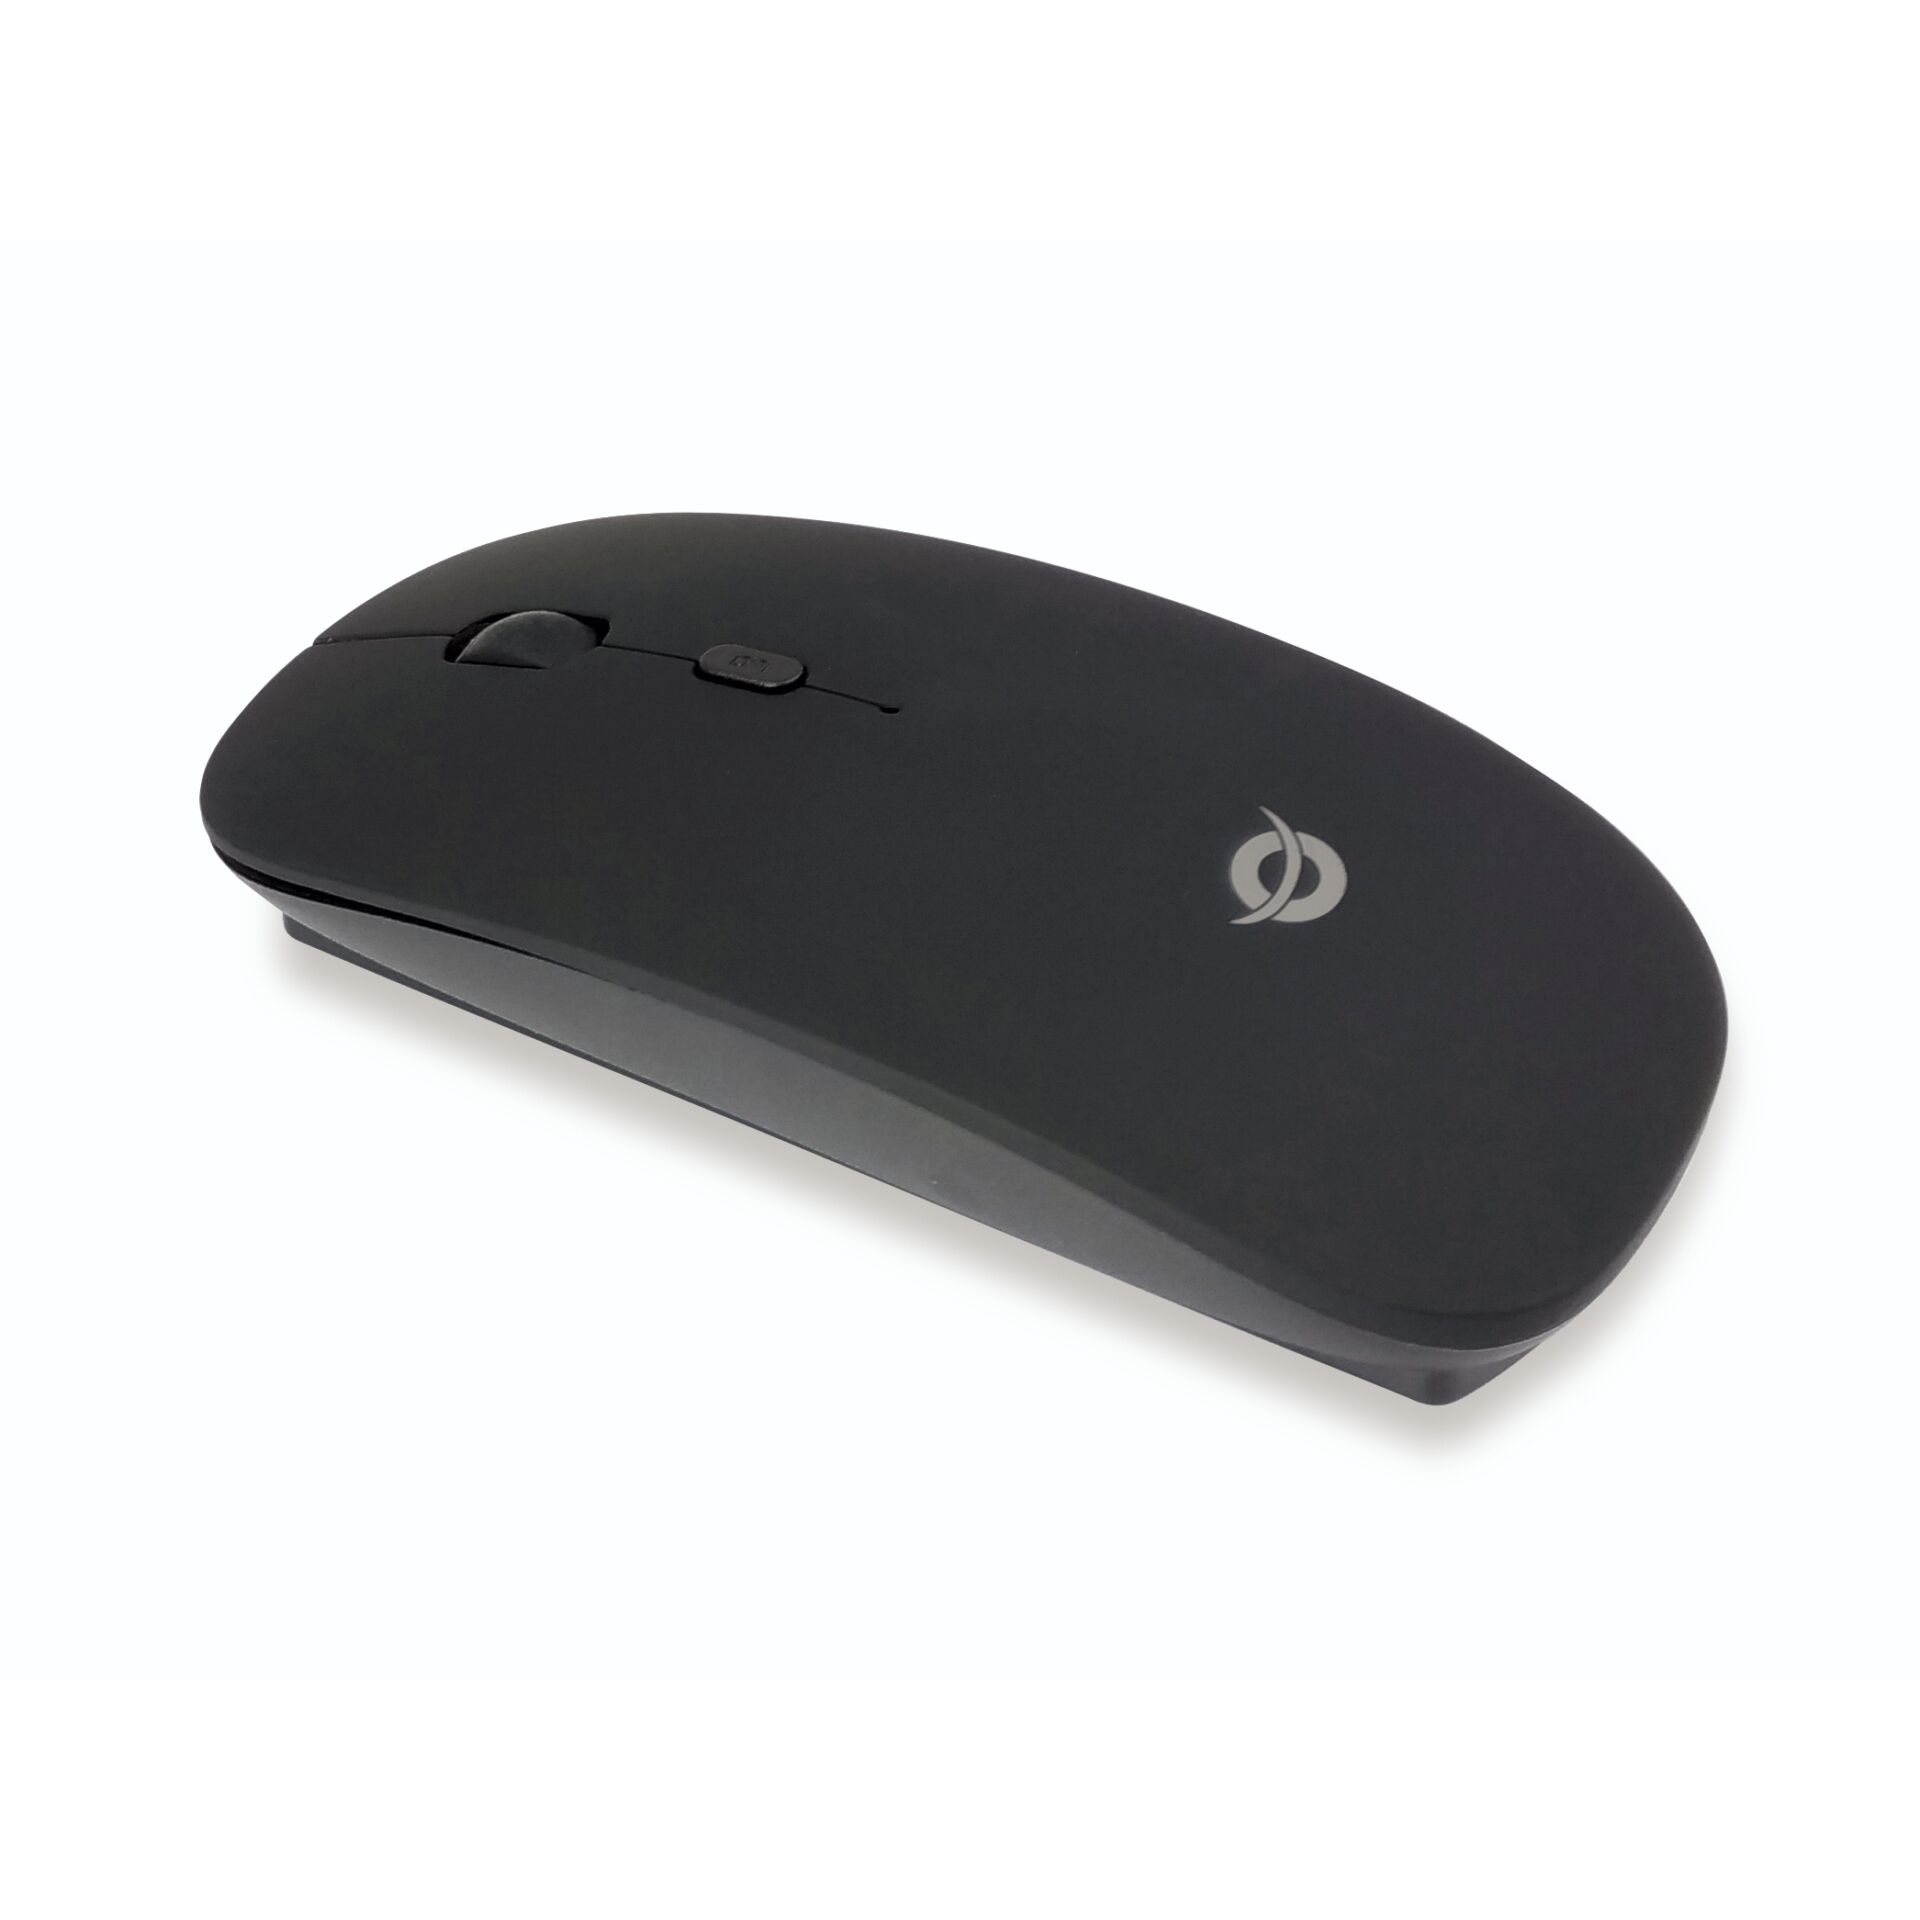 Conceptronic LORCAN01B Bluetooth Mouse